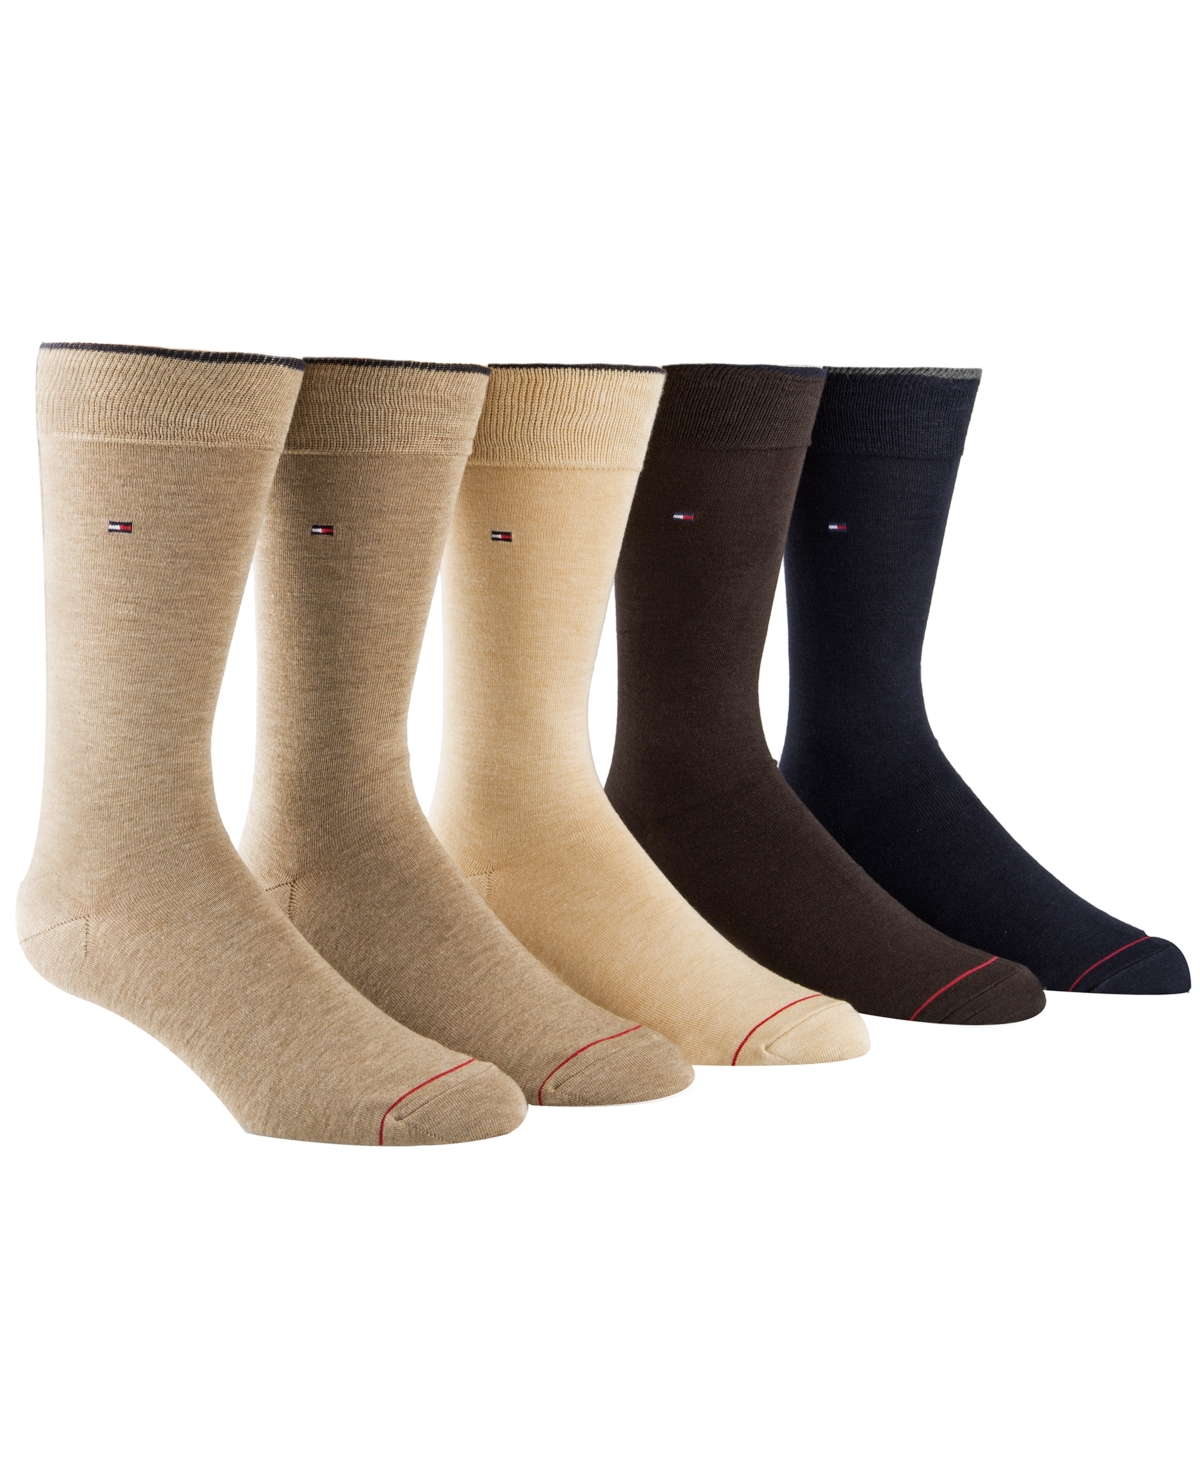 Tommy Hilfiger 5-pack Dress Socks, Assorted Colors In Tan,brown Assorted